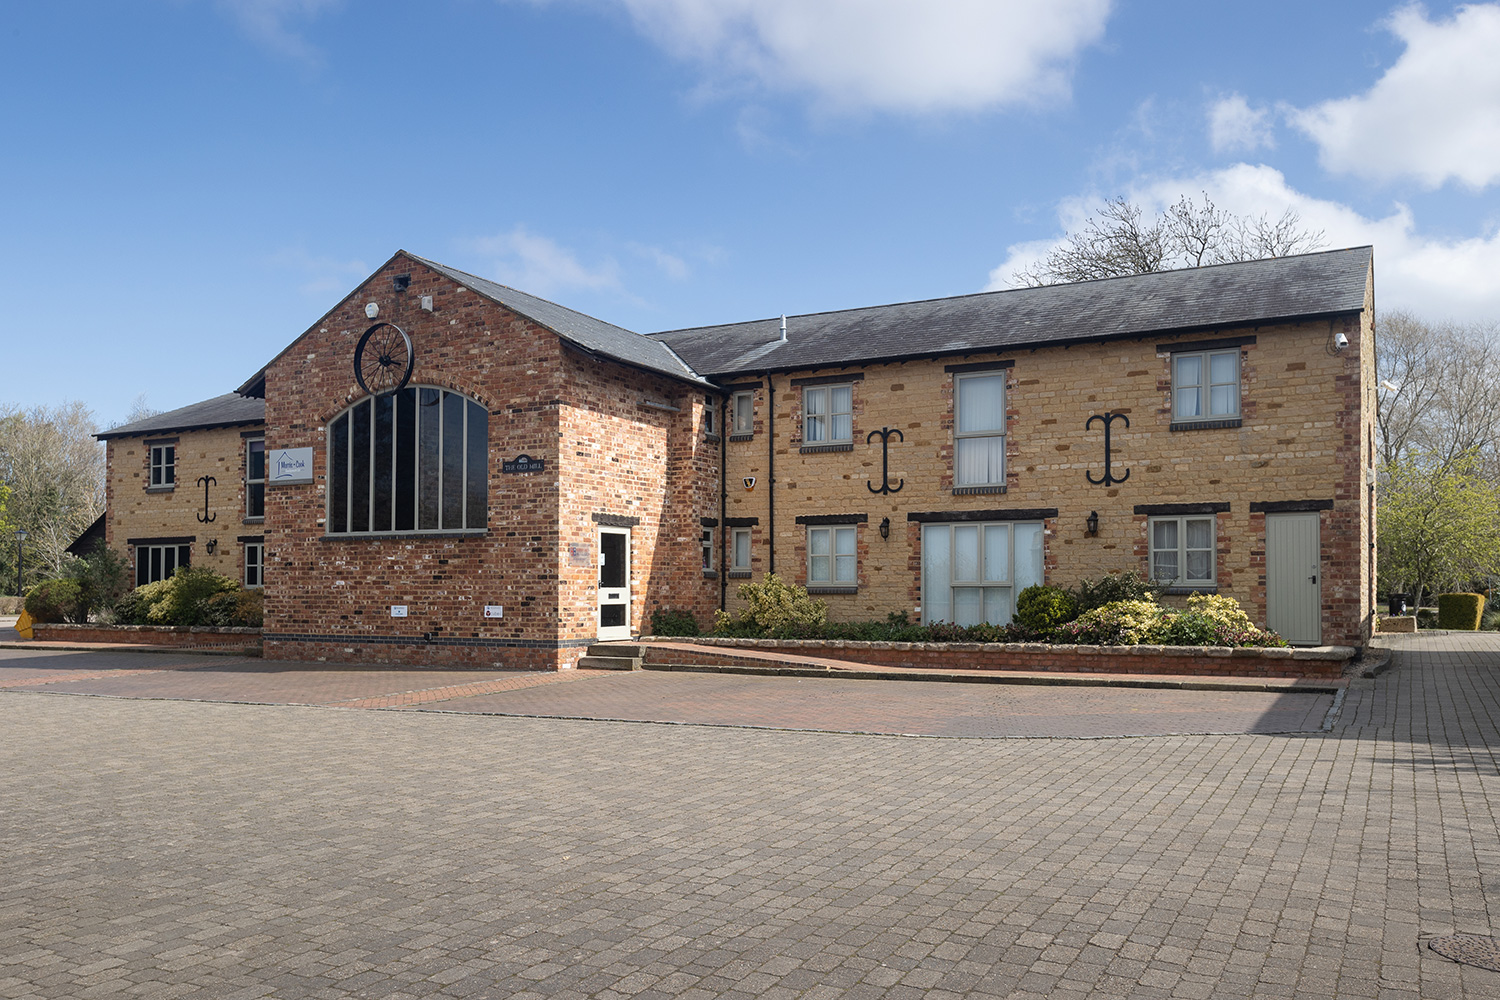 The Old Mill - one of the many offices to let at Blisworth Hill Business Park, Northamptonshire